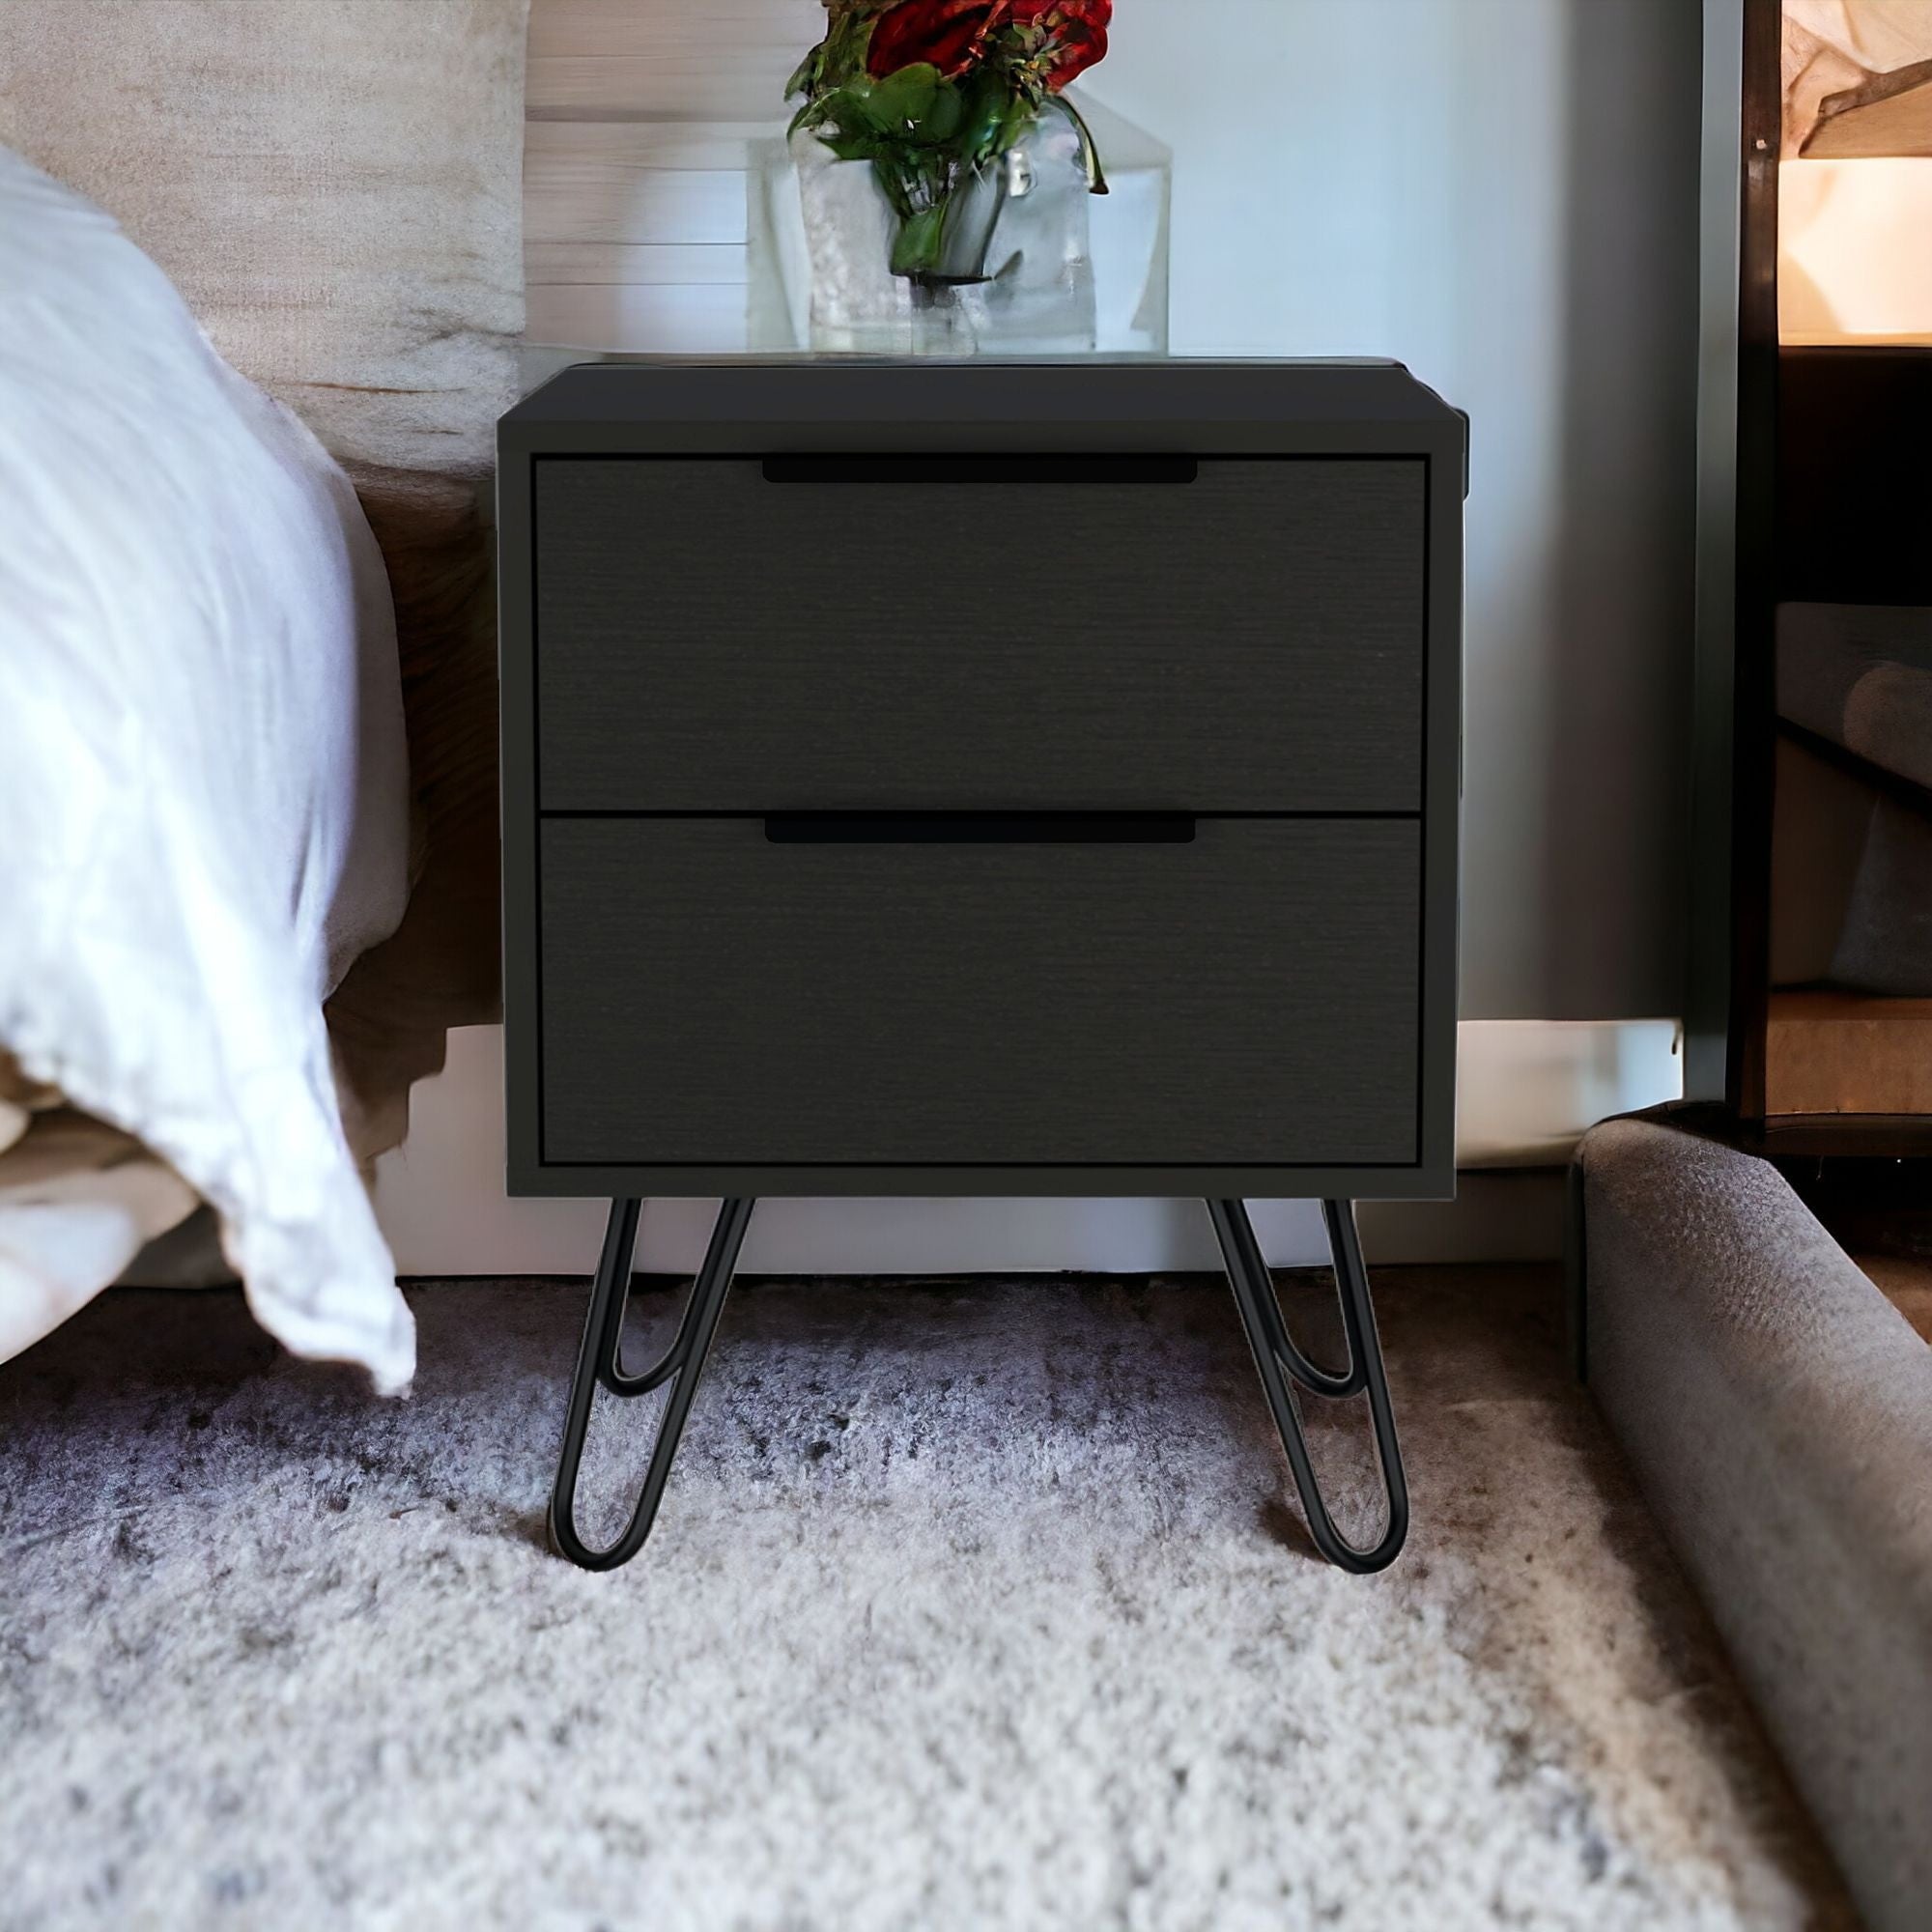 22" Black Two Drawer Faux Wood Nightstand